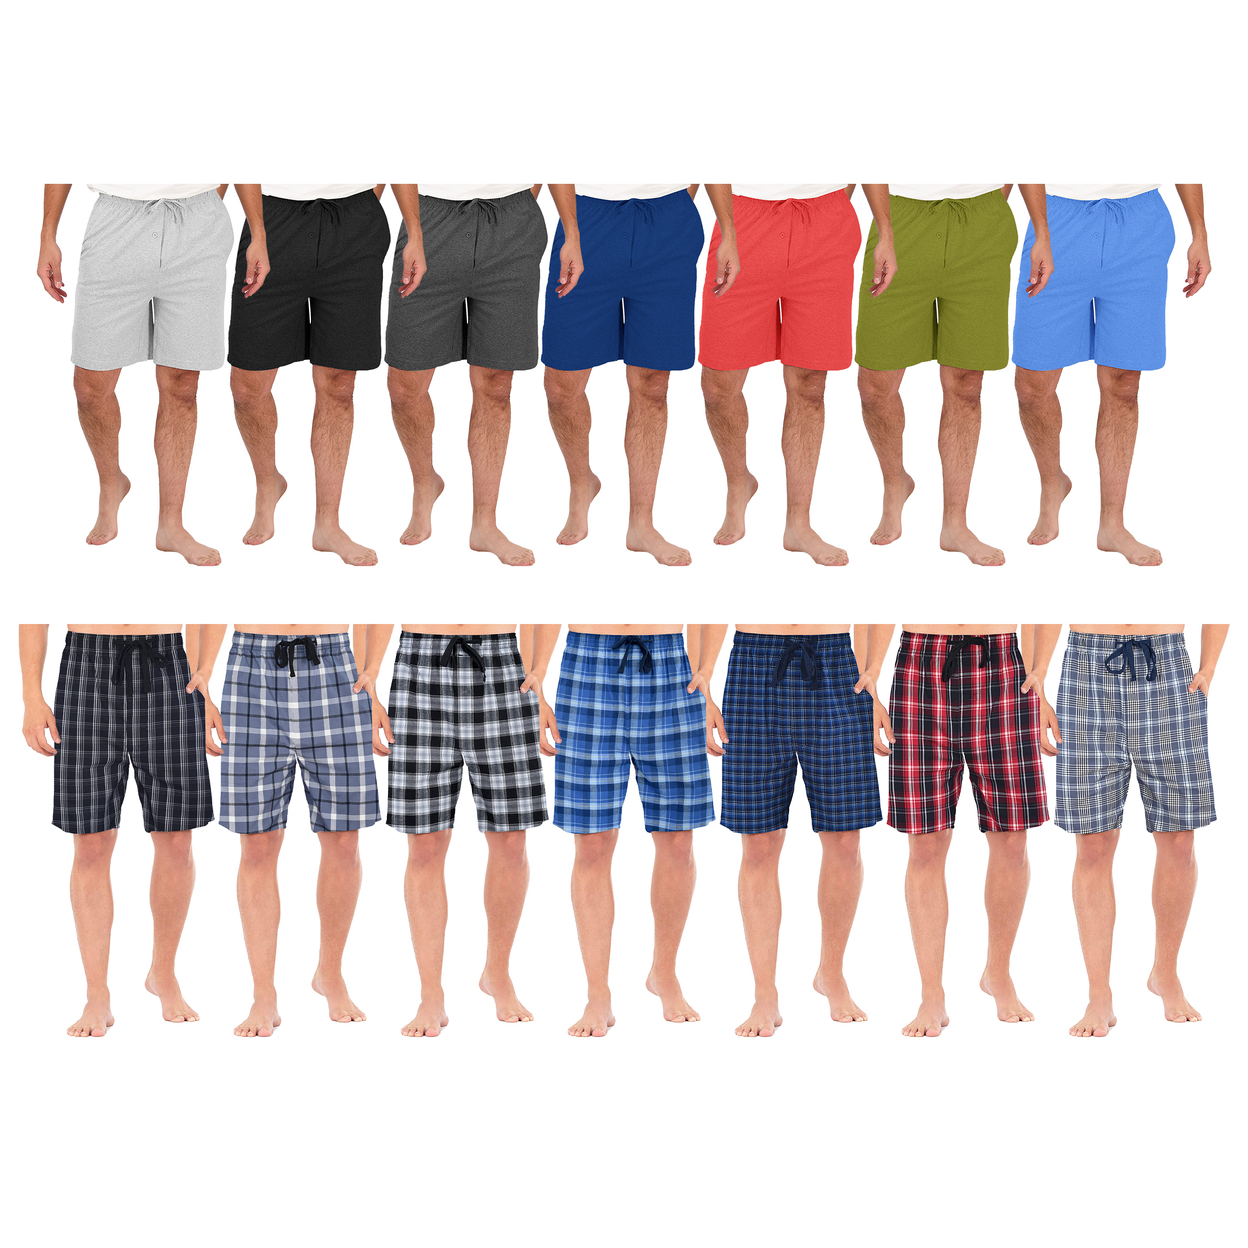 Multi-Pack: Men's Ultra Soft Knit Lounge Pajama Sleep Shorts - Solid, 1-pack, Small